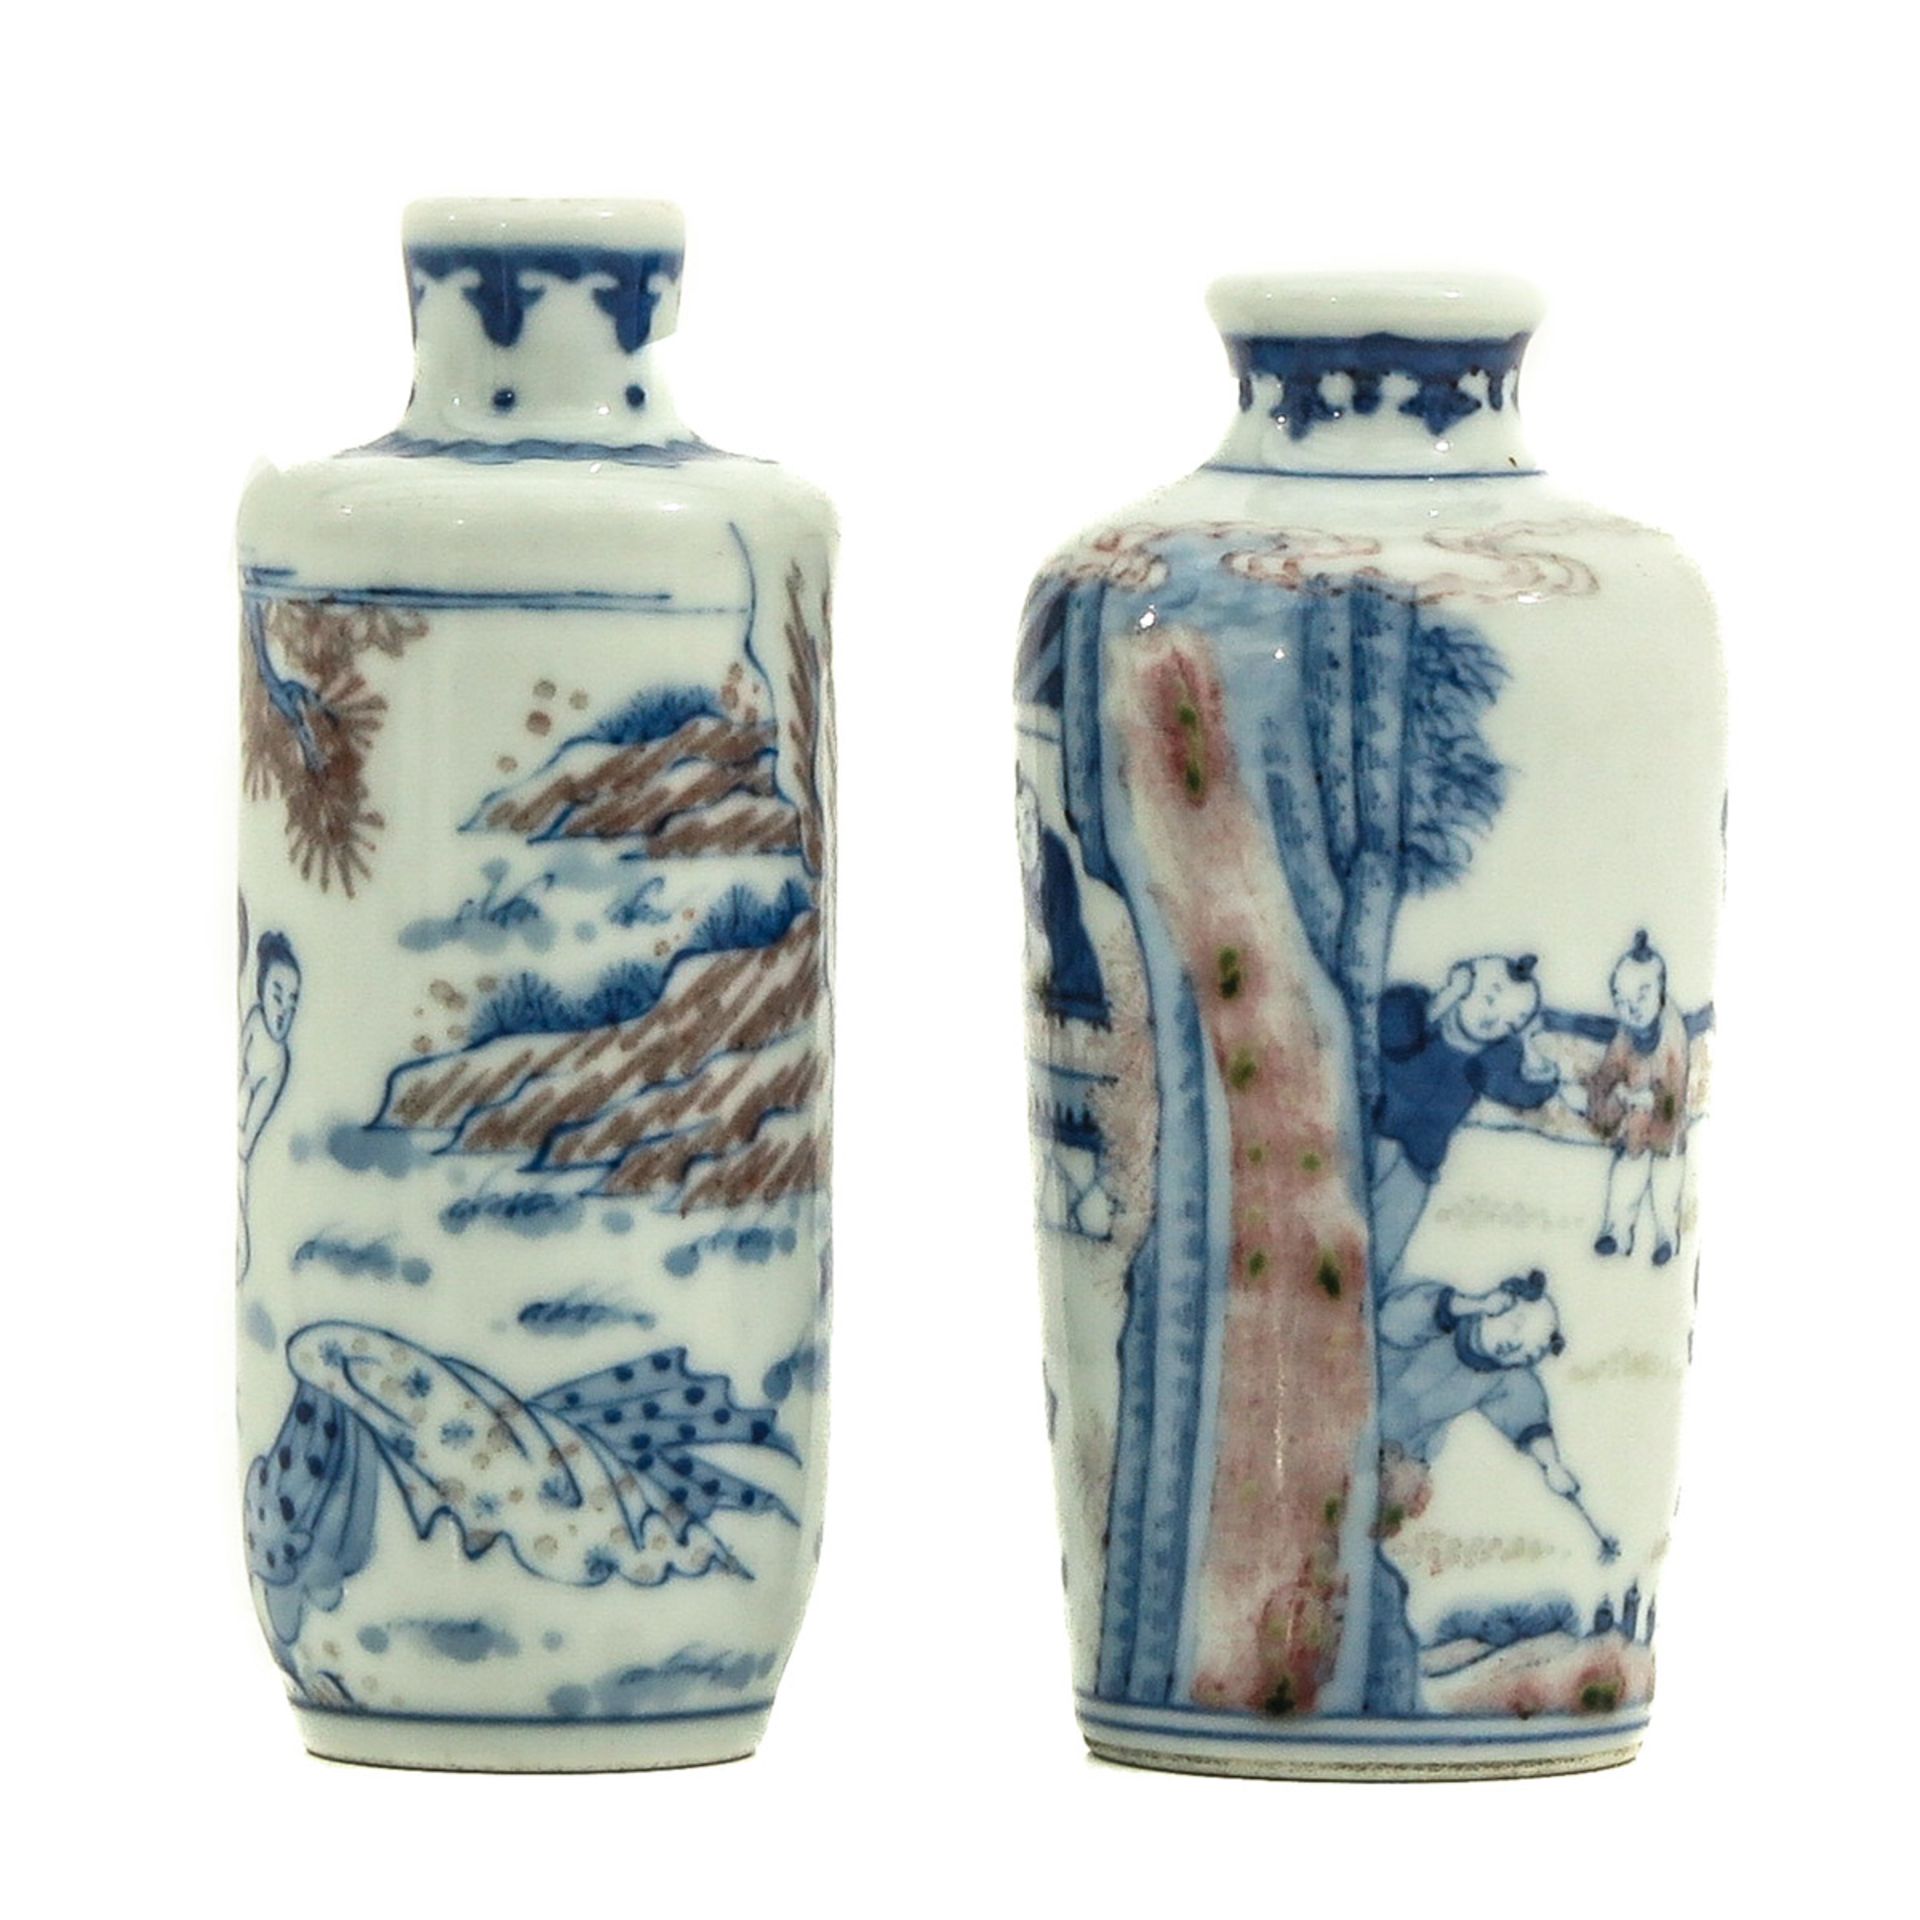 A Lot of 2 Snuff Bottles - Image 2 of 9